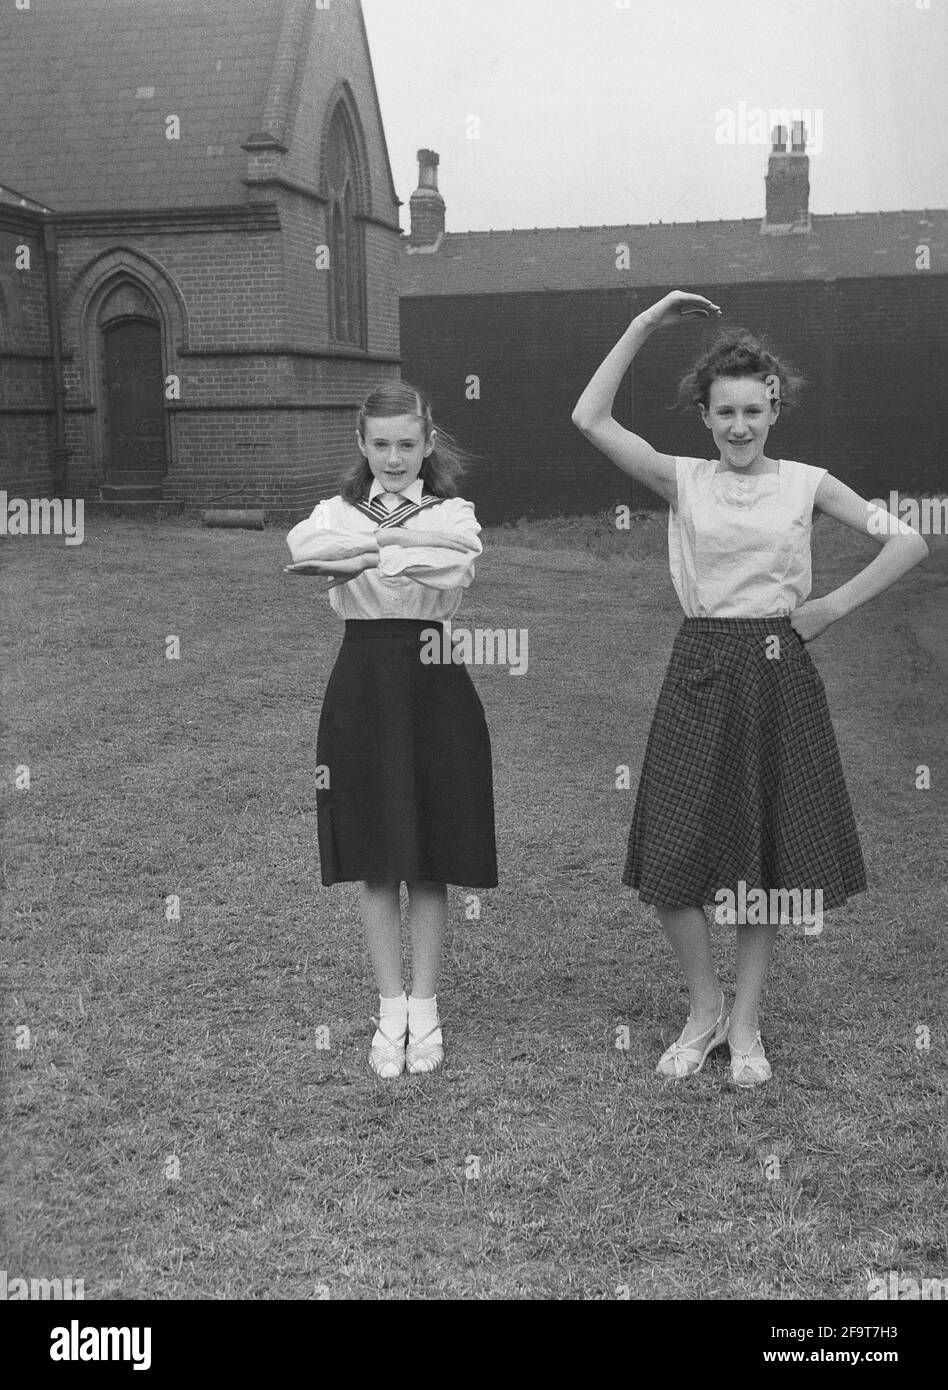 1956, historical, outside in the grounds of a church, two  girls in their outfits, showing the moves they will perform in the traditional May Queen carnival, England, UK. An ancient festival of Spring and celebrations, in many villages, May Day involved the crowning of a May Queen and dancing around a Maypole, activities that have taken place in England for centuries. Selected from the girls of the area, The May Queen wearing a crown, would start the procession of floats and dancing. In the industrialised North of England, the Church Sunday Schools often led the organisation of the day. Stock Photo